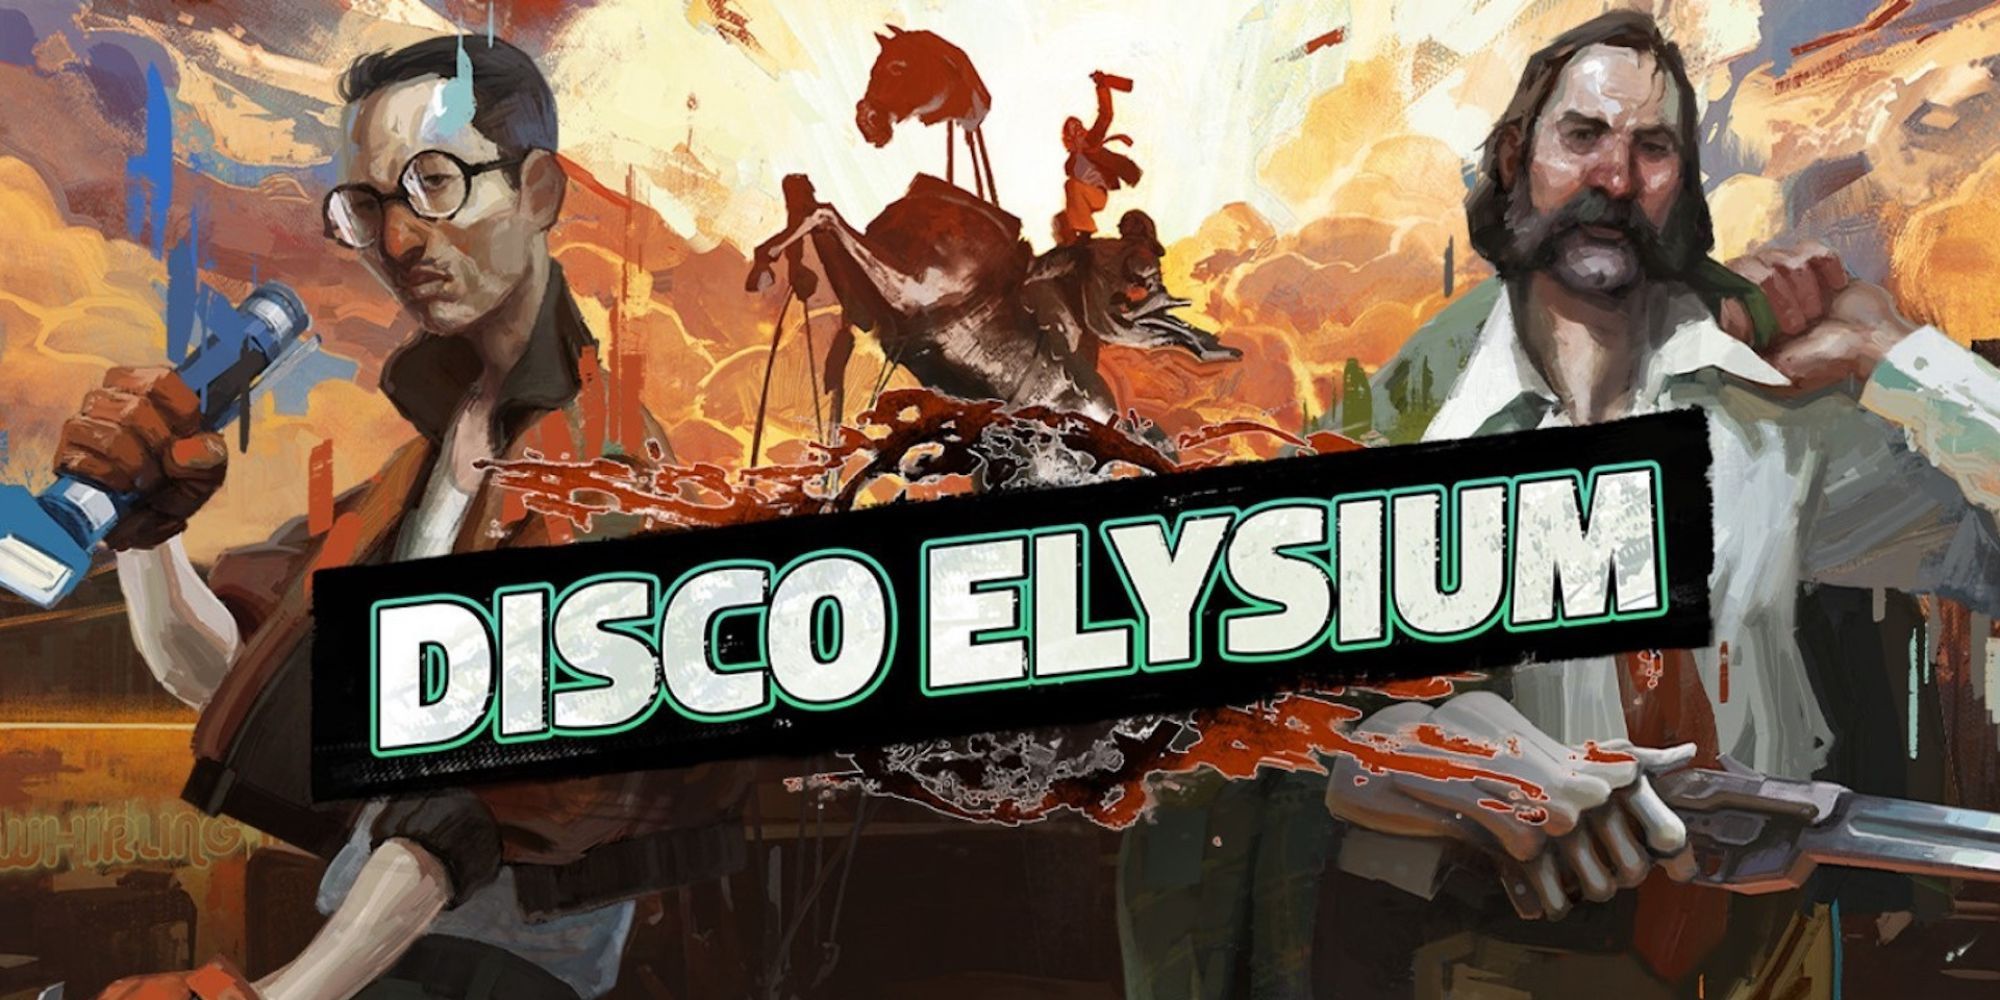 Disco Elysium Cover Art Of The Protagonist And His Detective Partner